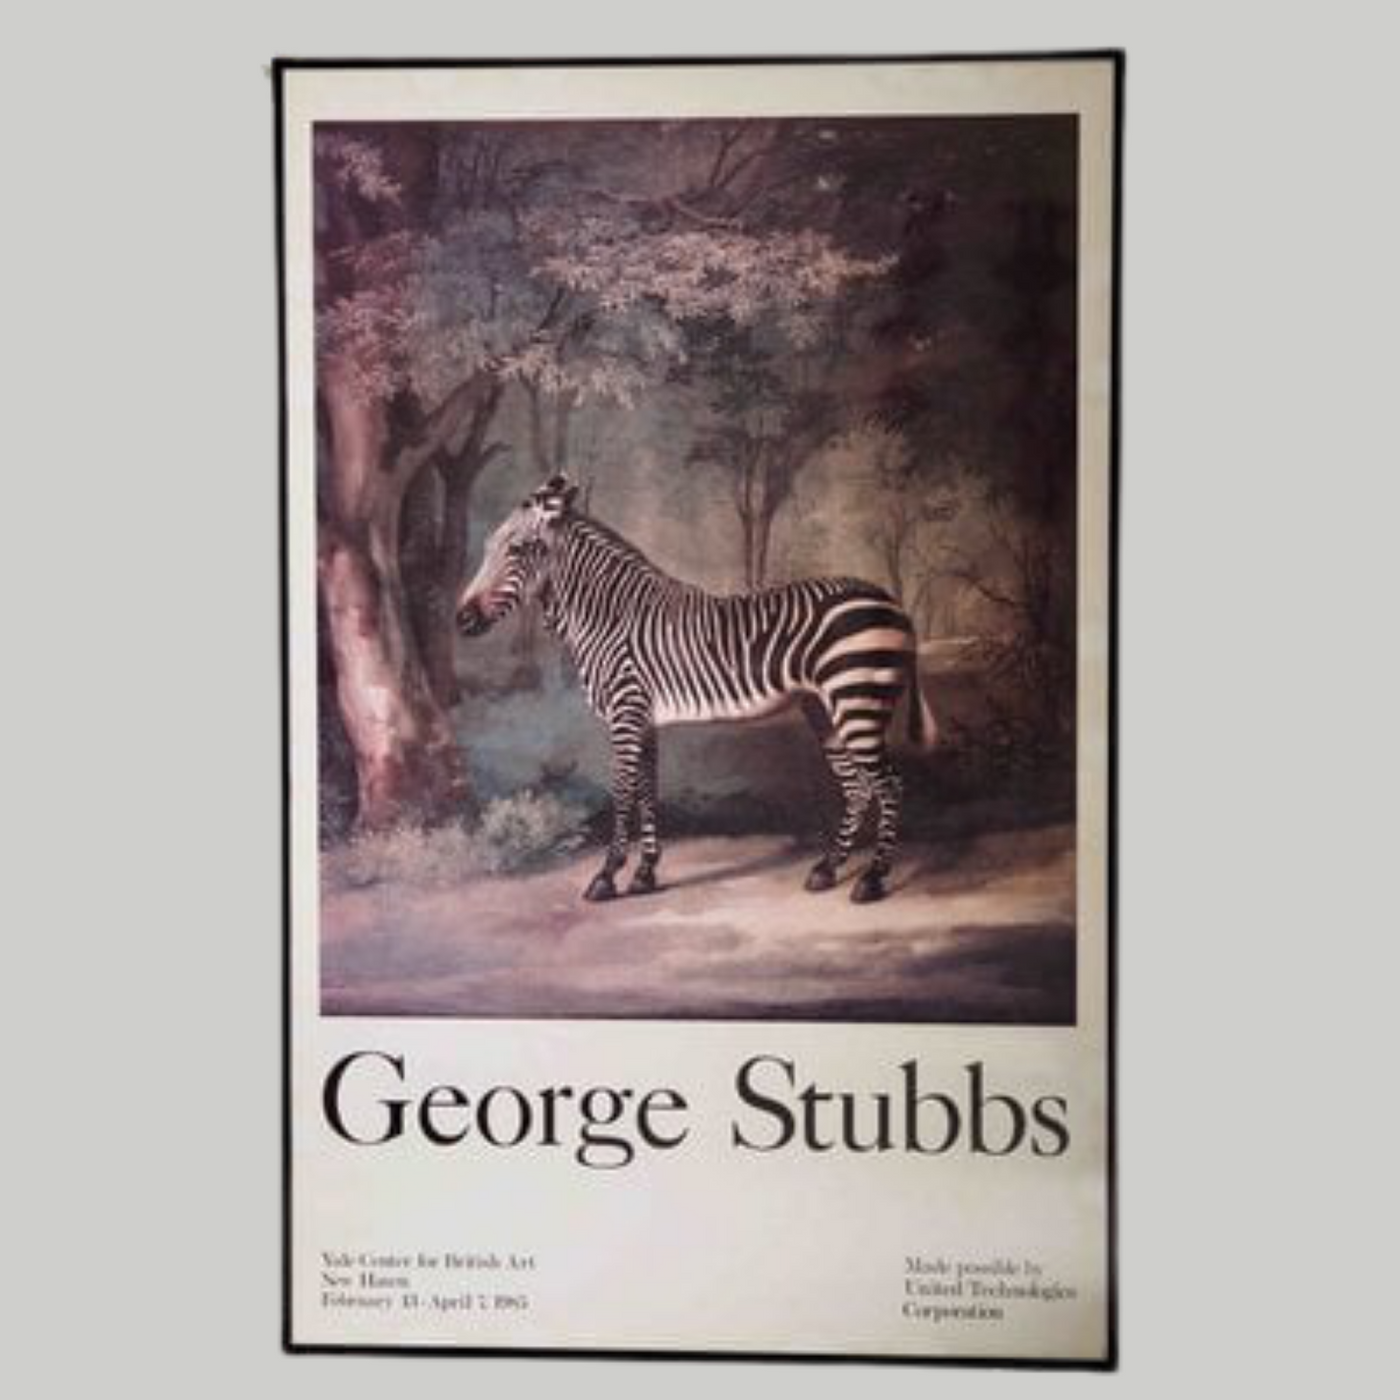 Exhibition Poster For George Stubbs